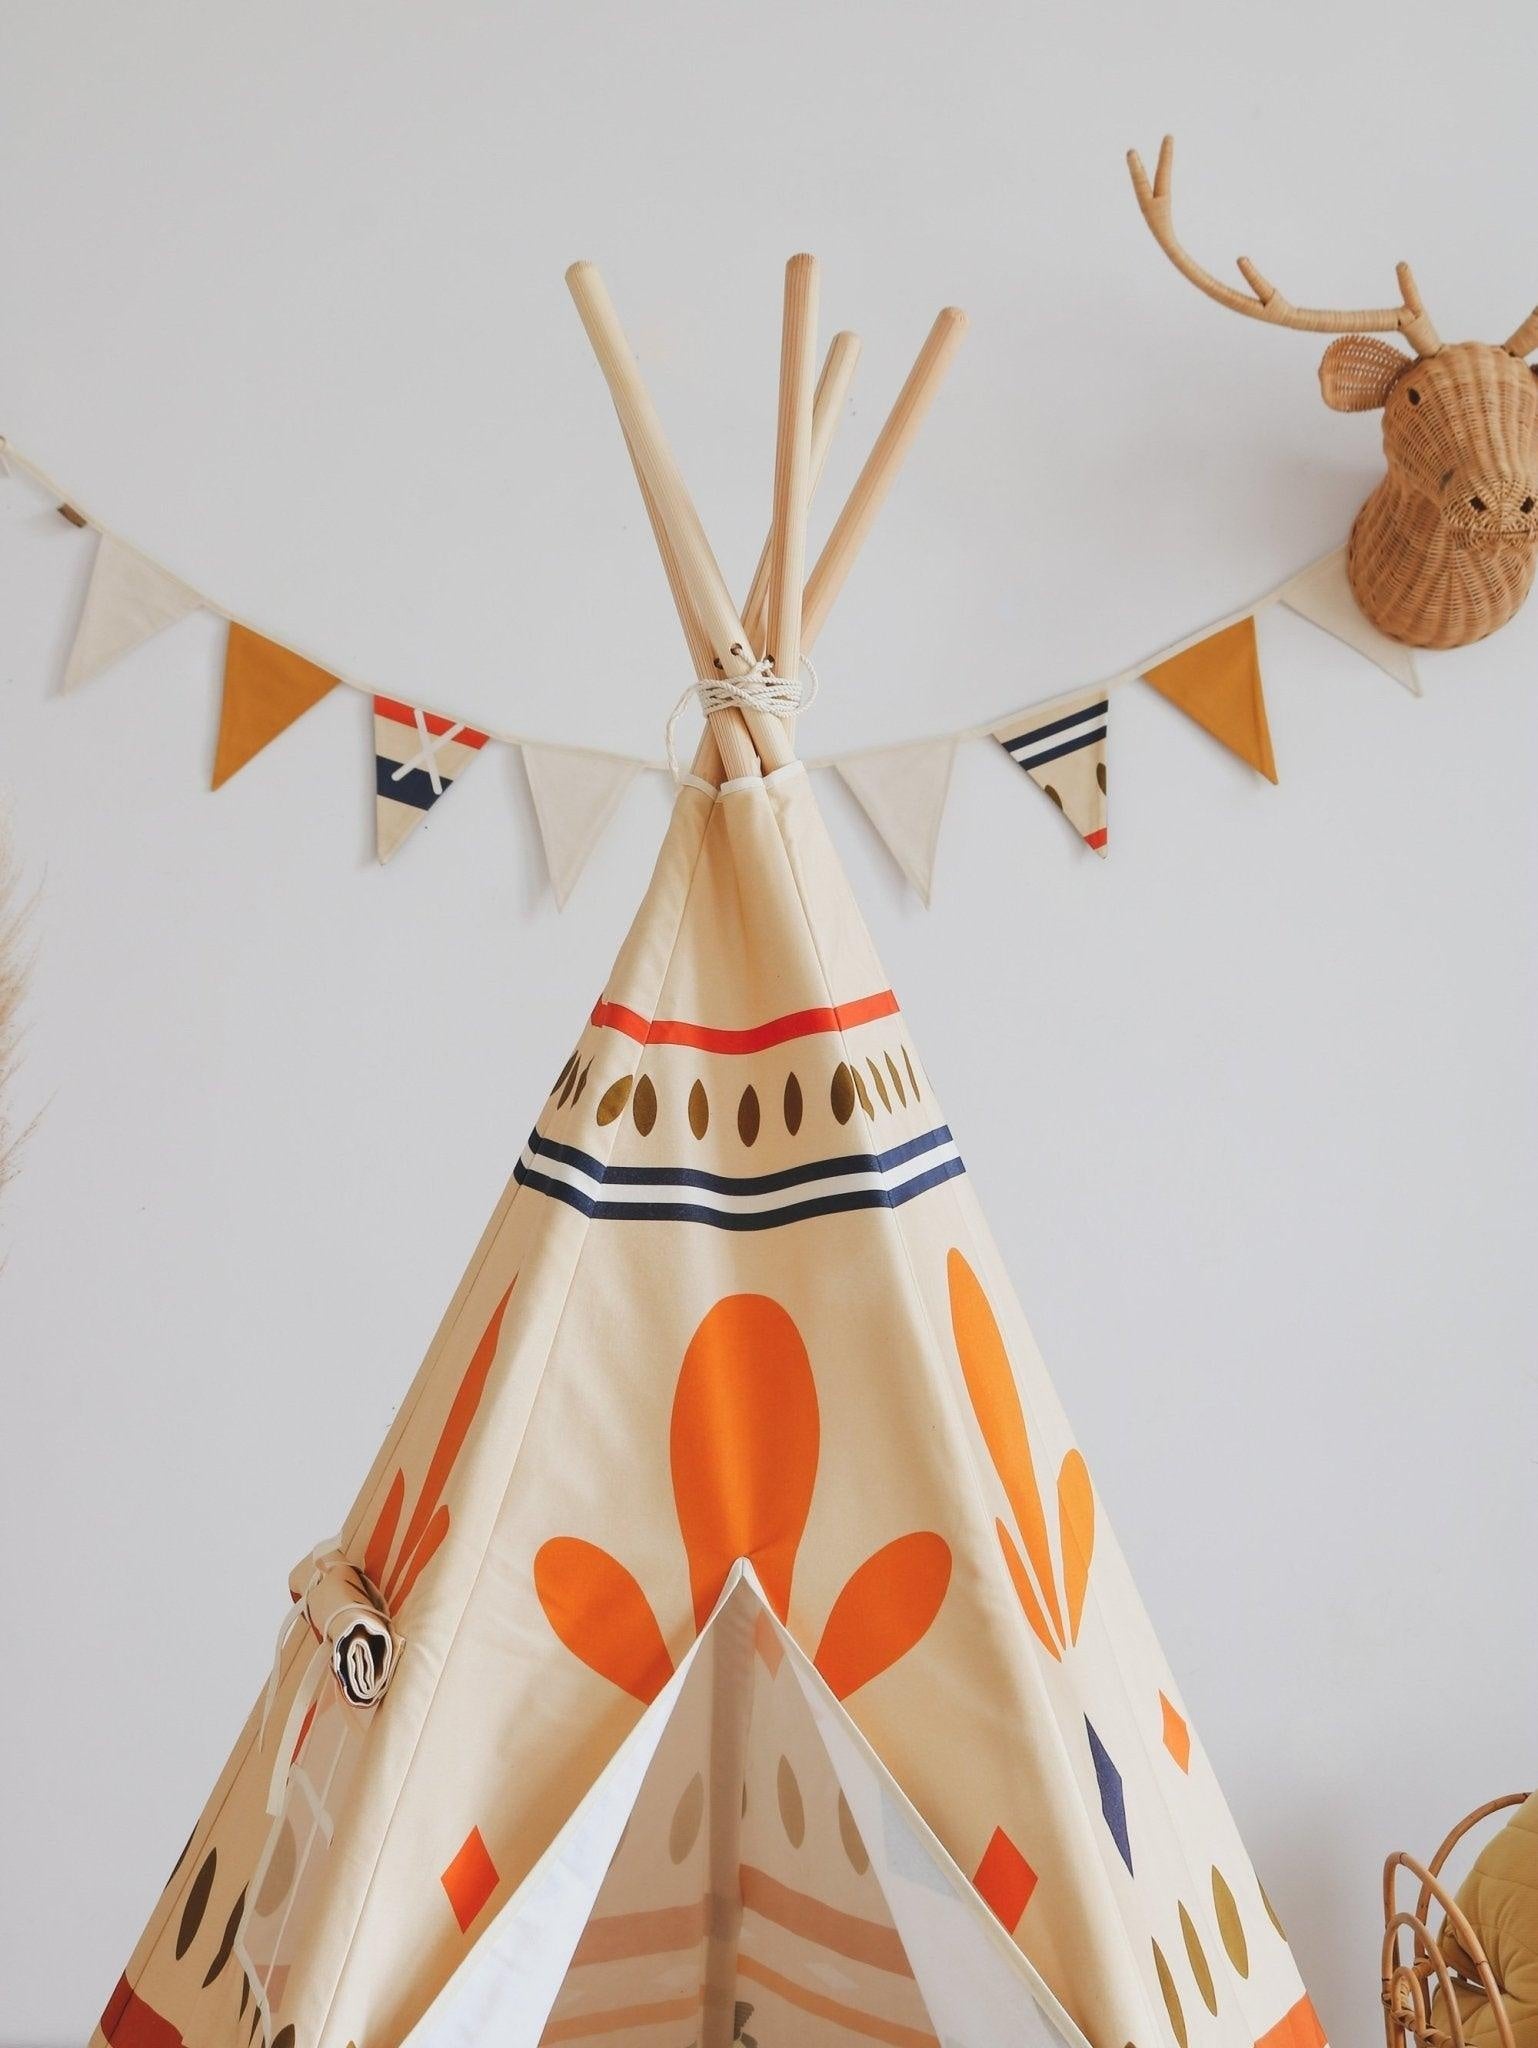 BABY TIPI - Baby Shell Fabrication Française